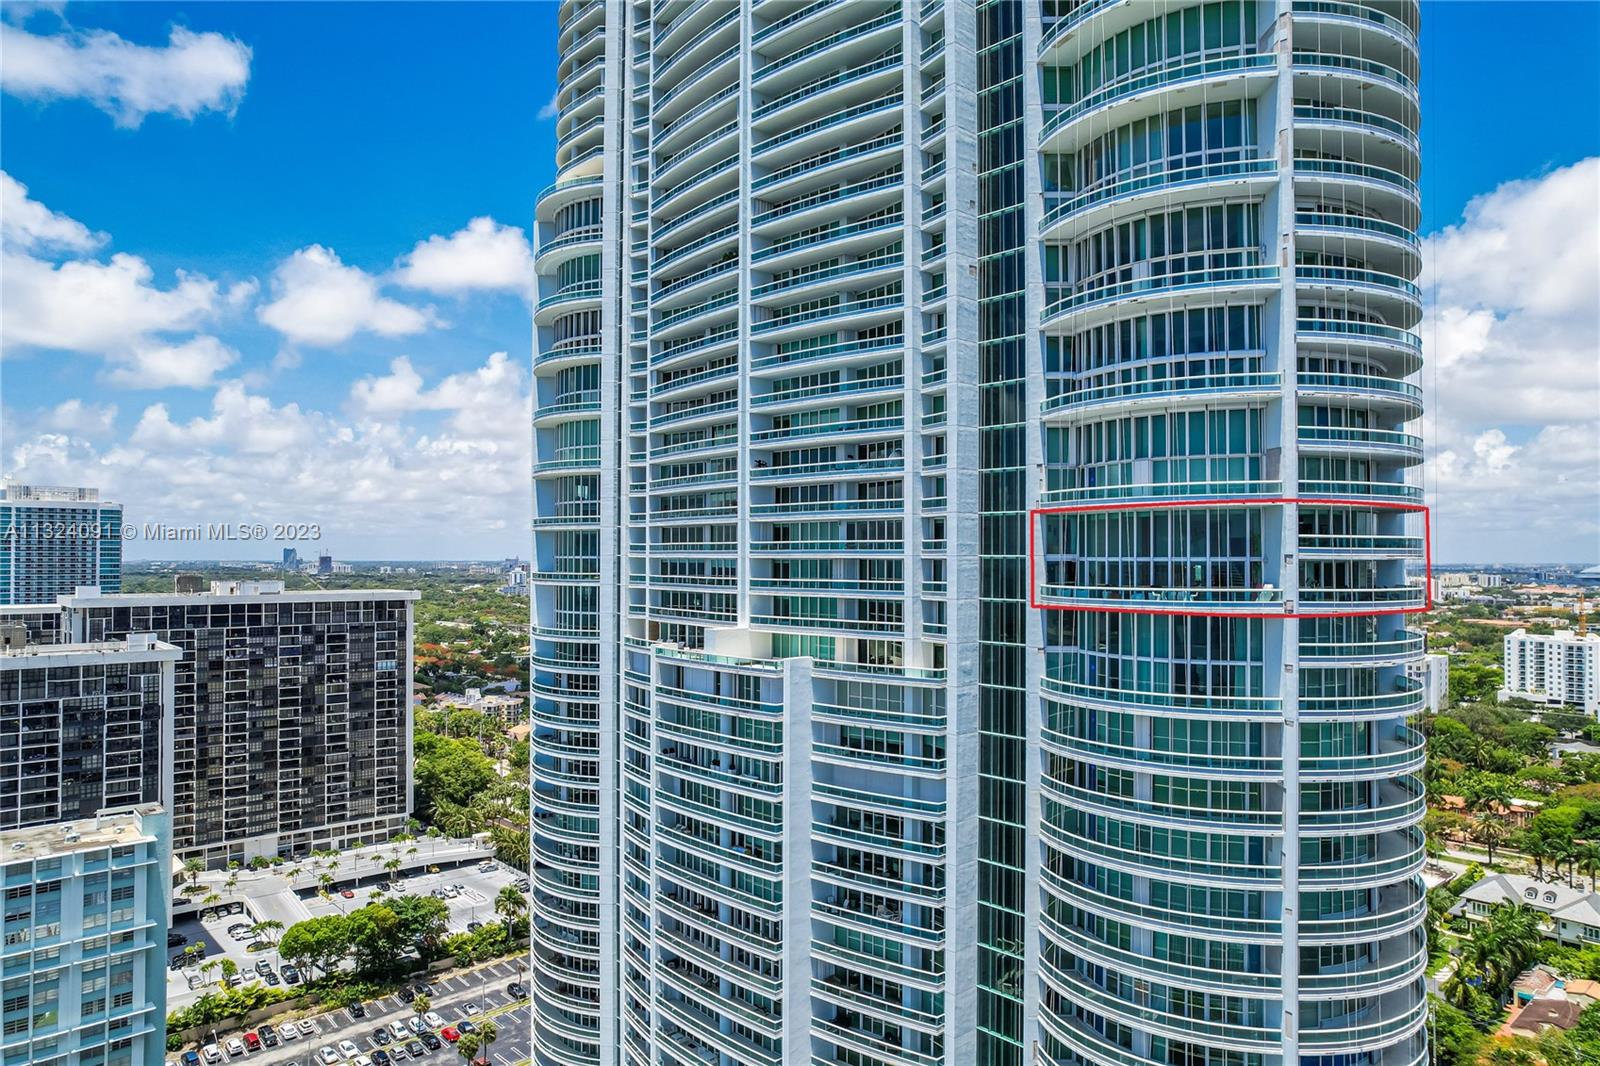 This luxurious 2 story waterfront masterpiece, this unique mansion in the sky with 20ft ceilings includes 5beds/5.5baths. This unit features a stunning 1,742 sq ft of wrap around terraces of breathtaking, unobstructed views of the Atlantic Ocean, Biscayne Bay & Miami skyline. All closets are fully built-out, and the master-suite is a pure beauty. Unit comes with a storage, 4 parking spaces.
With a prominent entrance and lobby open 24 hours to welcome you to the next level of exclusivity and sumptuous lifestyle this condominium offers first class amenities and in house management to assist you. Enjoy luxury amenities as part of living in Santa Maria such as waterfront pool, marina, tennis courts, club house, private gym in the 51th floor and café restaurant in lobby. Furniture negotiable.